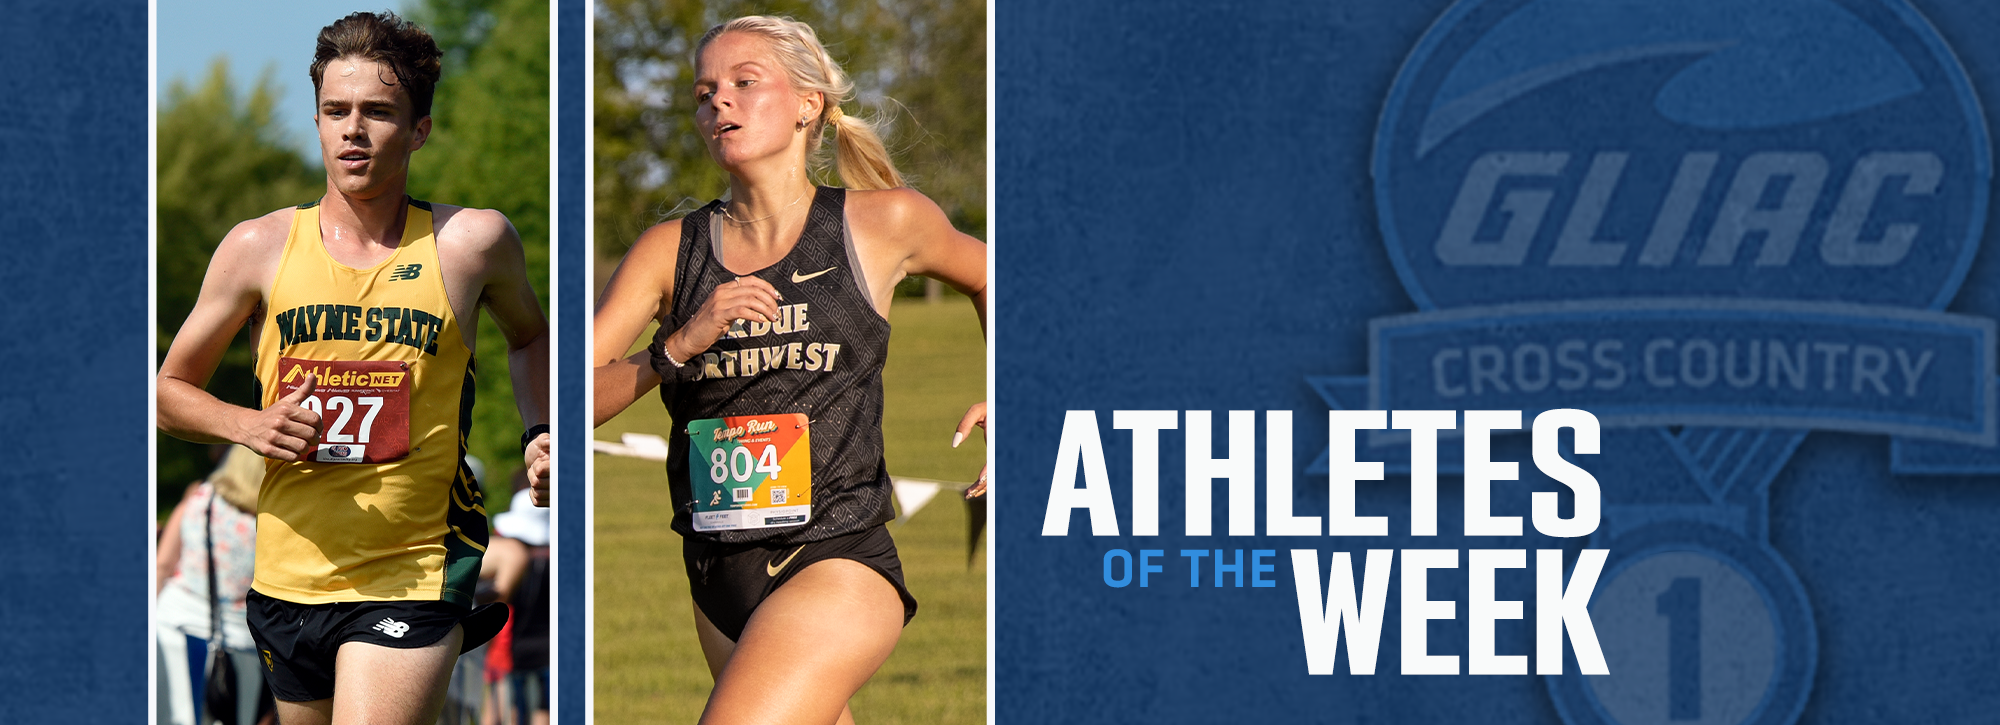 WSU's Allen and PNW's Shaginaw honored with GLIAC weekly cross country awards